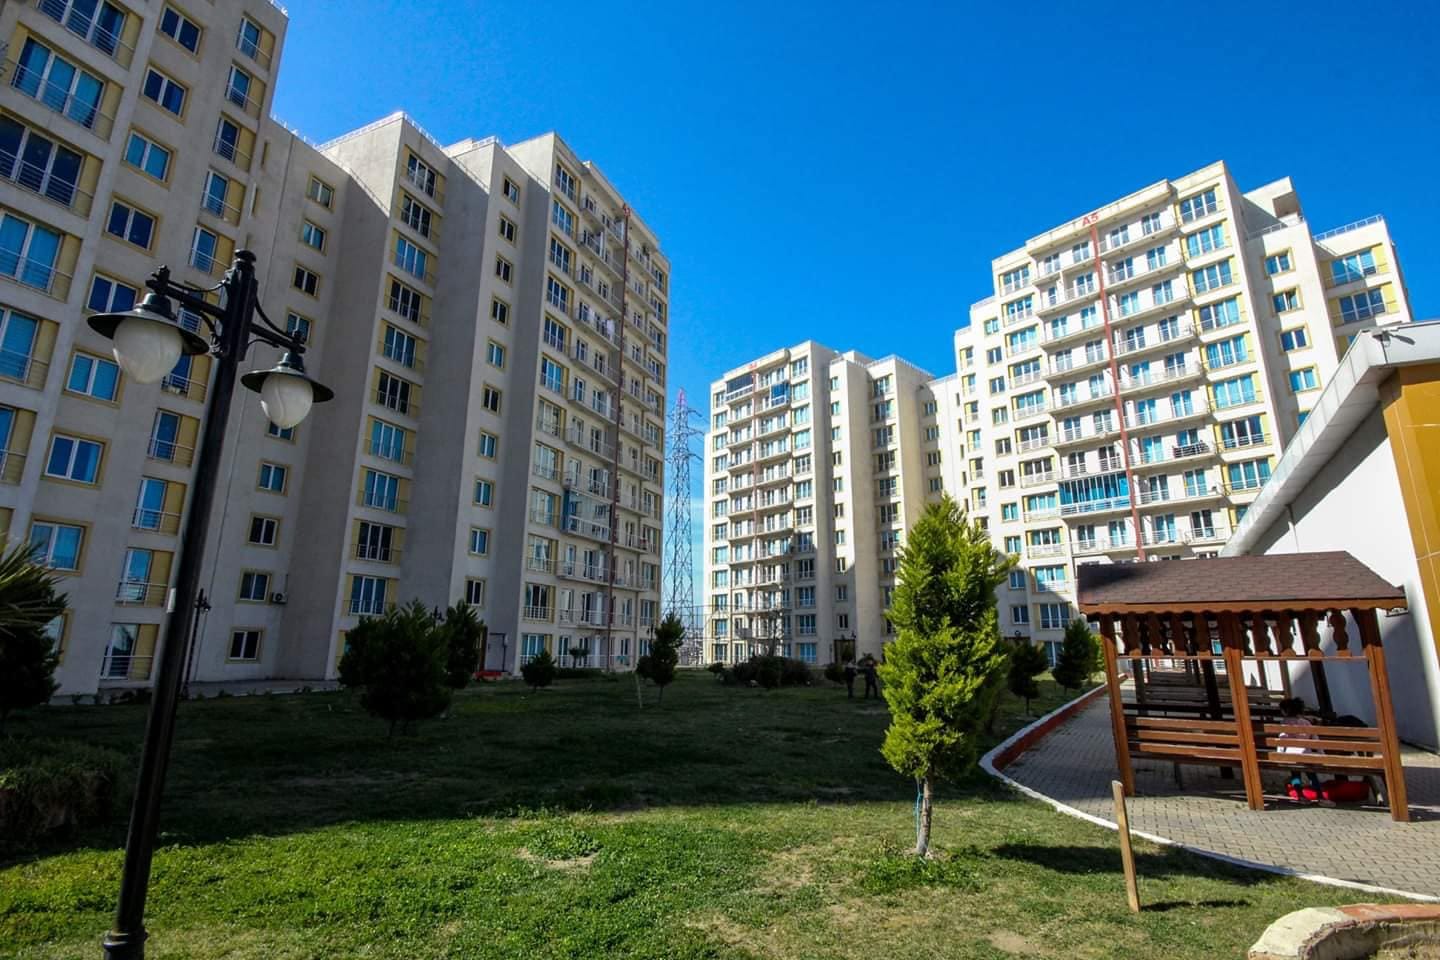 Apartments of different sizes within a complex that includes all services in “esenyurt” area